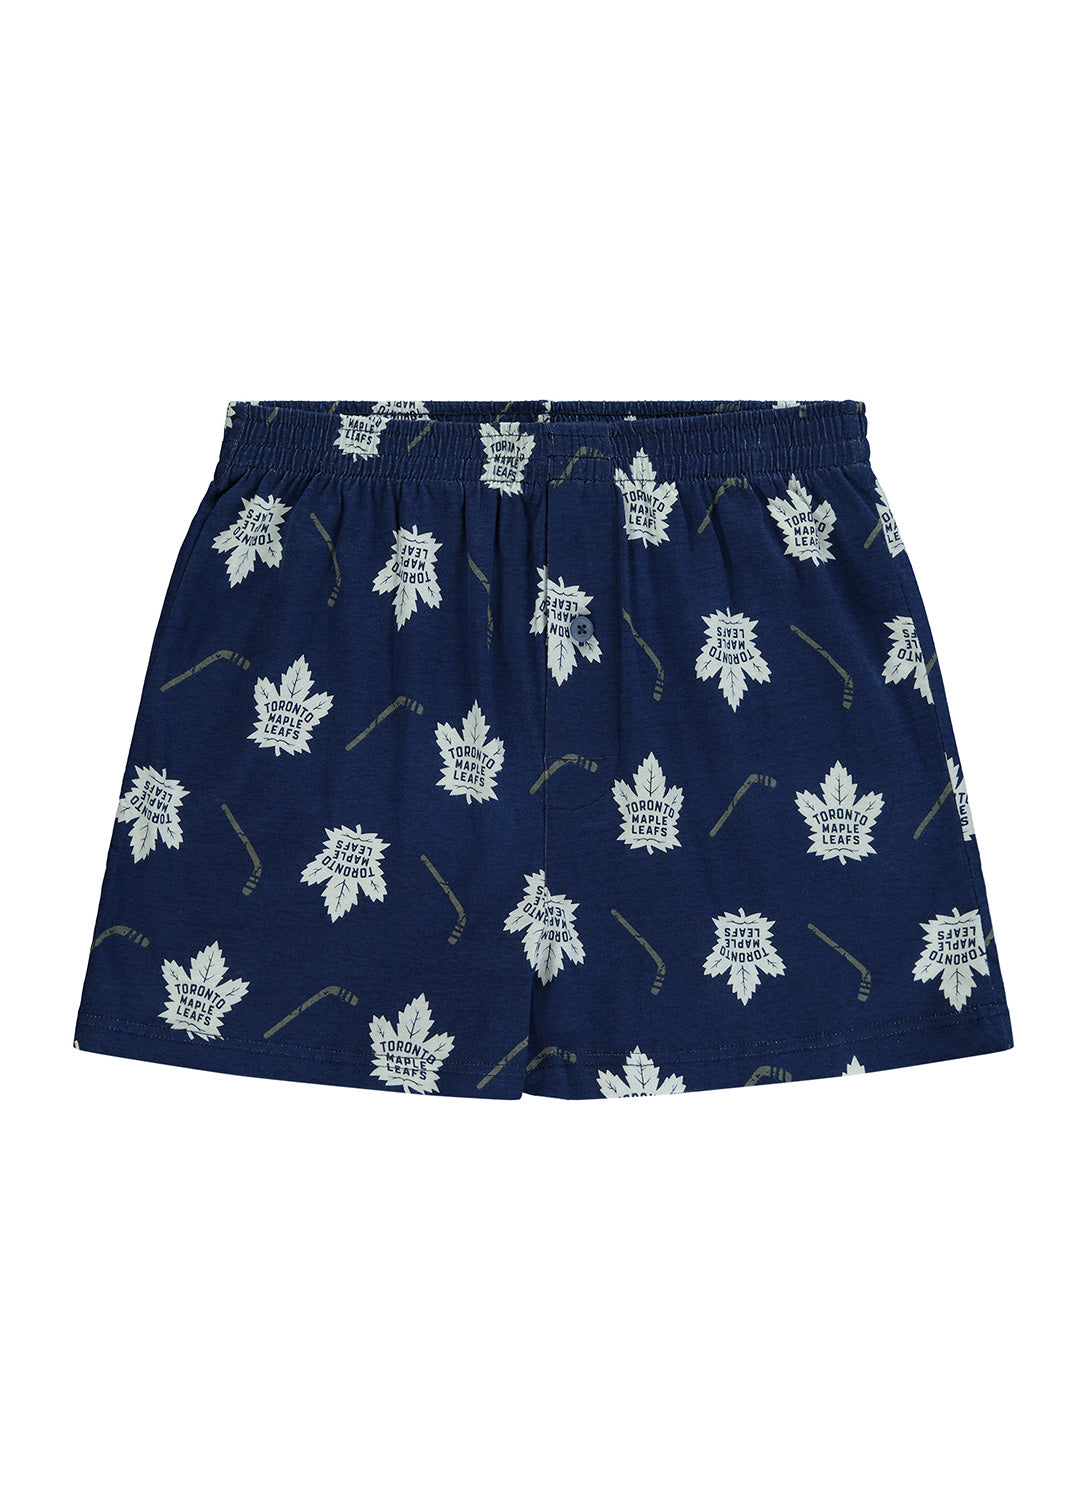 Mens boxers with Toronto Maple Leafs print (navy)